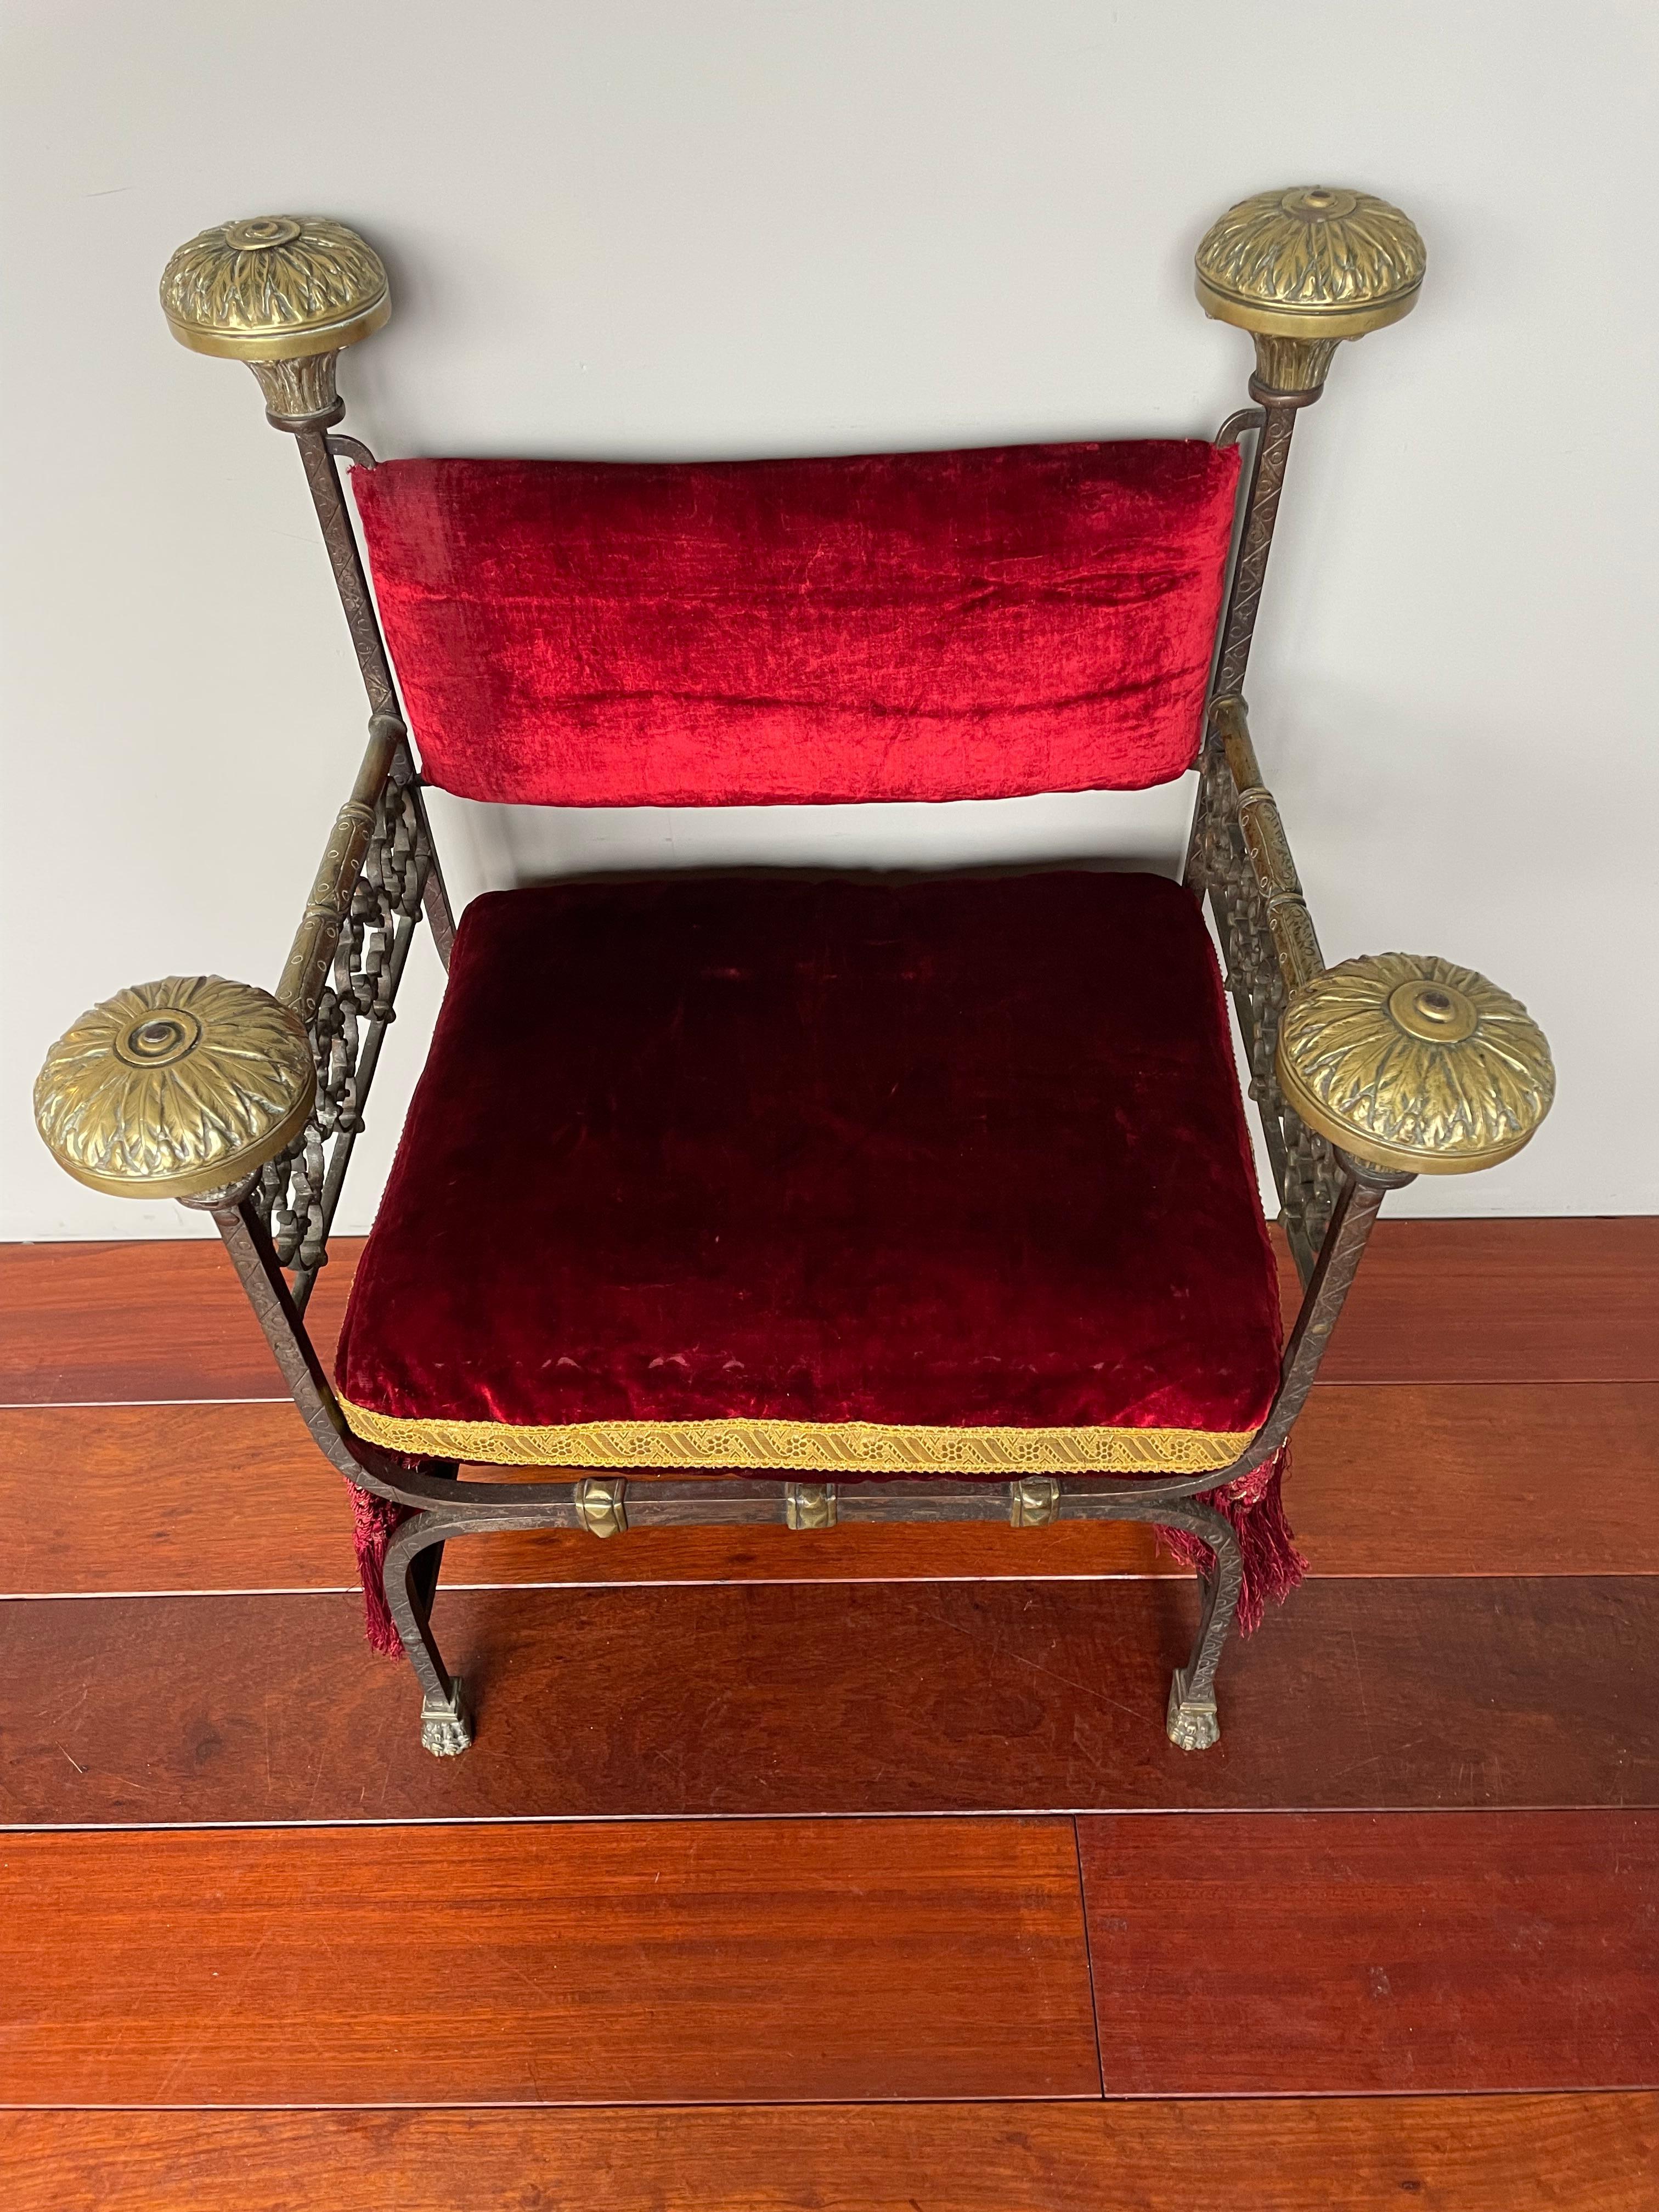 Antique & Stunning Wrought Iron & Bronze Gothic Castle Chair w. Scarlet Red Seat 14